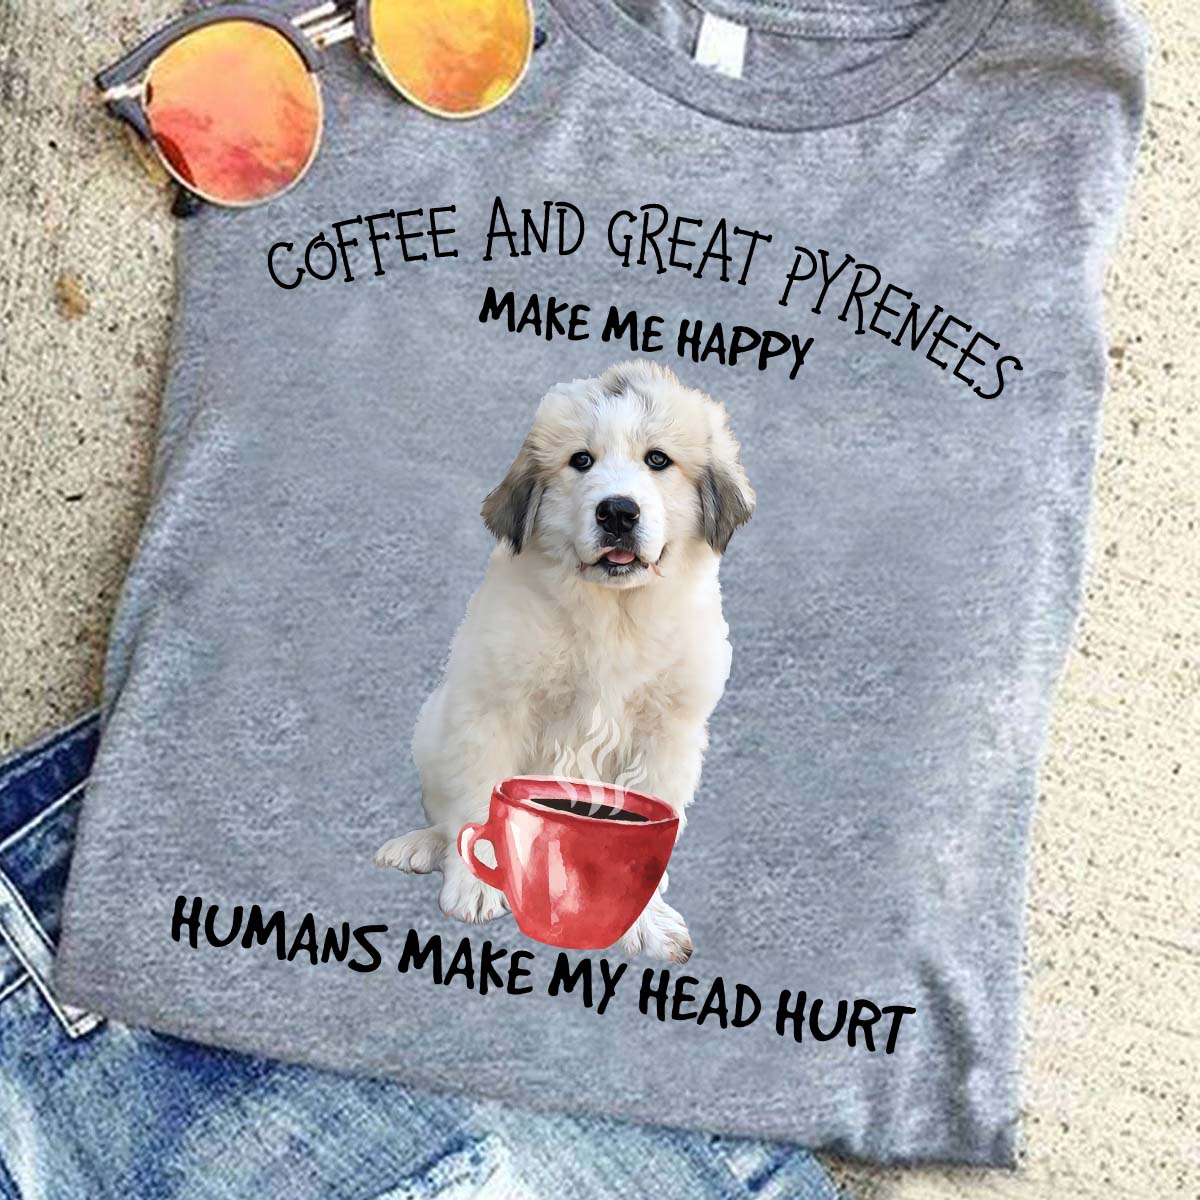 Coffee and great pyrenees make me happy humans make my head hurt